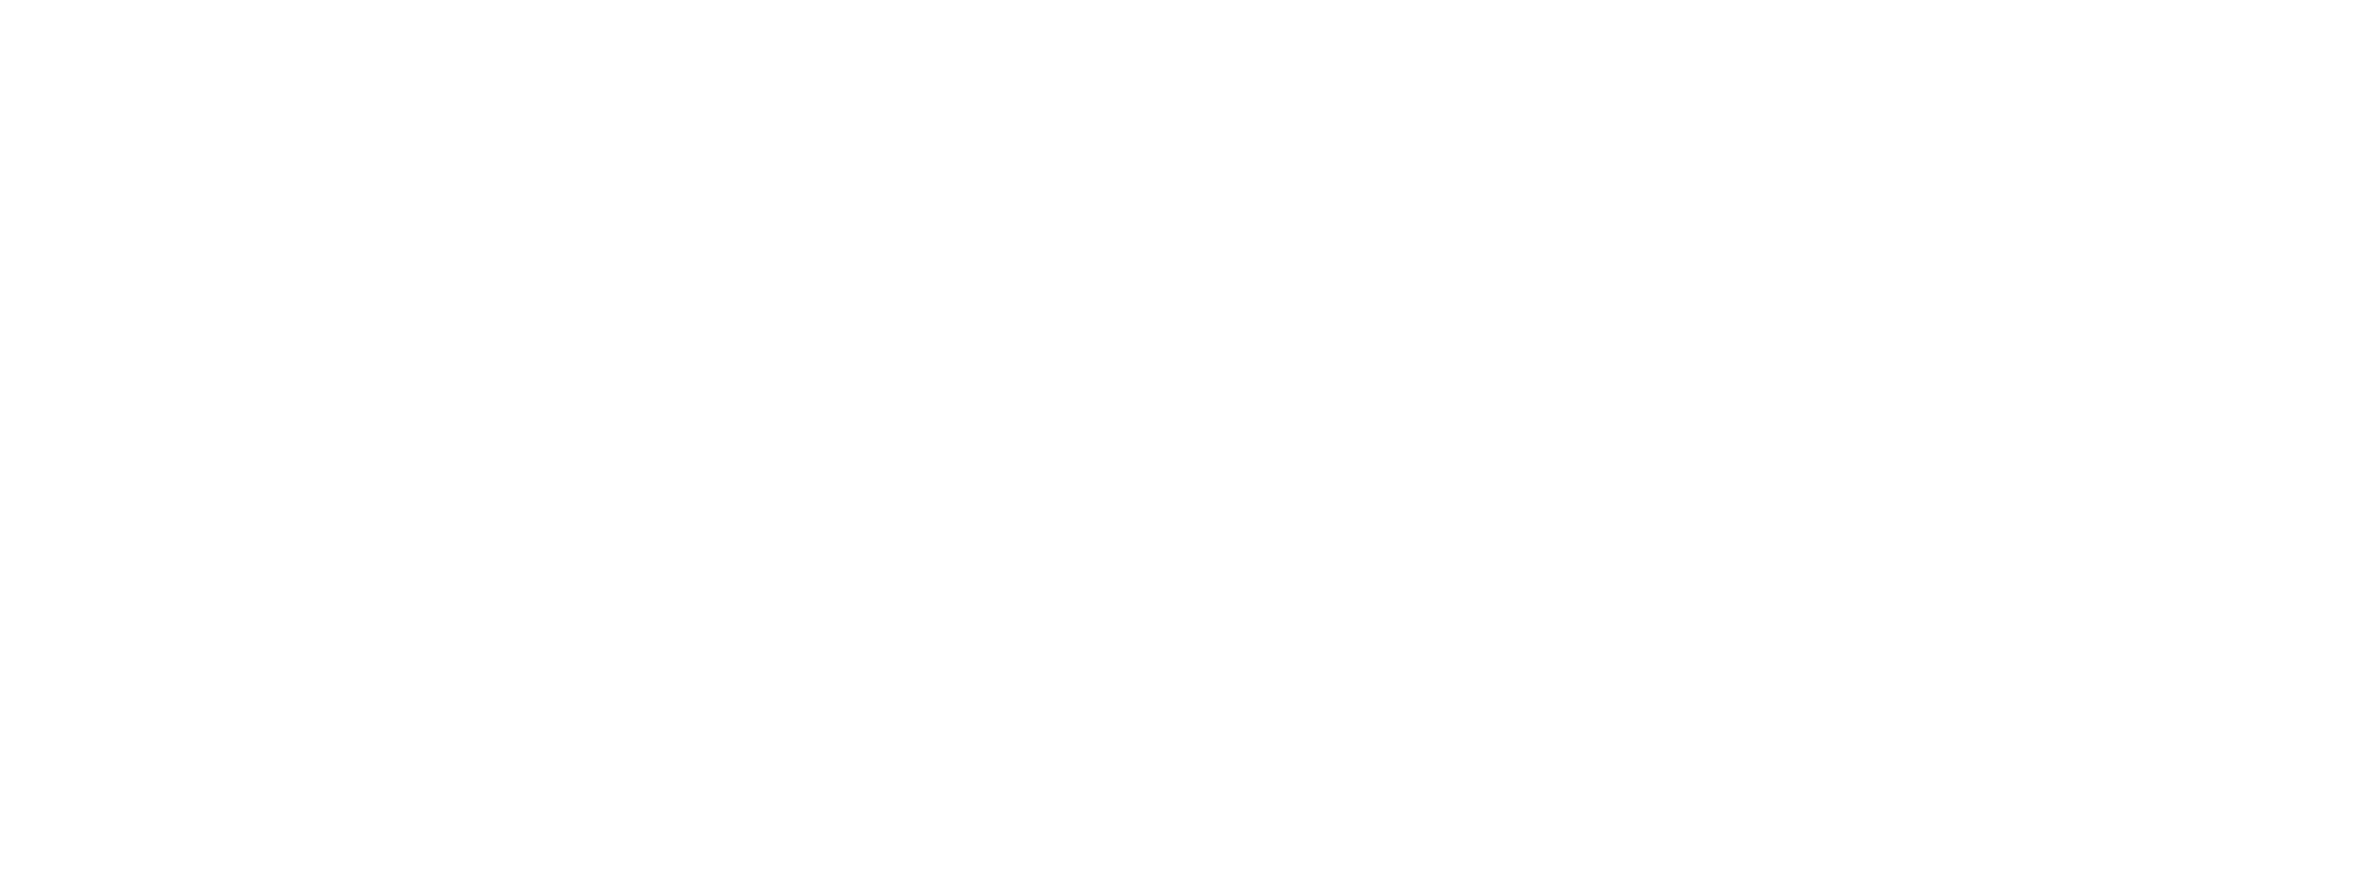 Towards COP 26 Conference